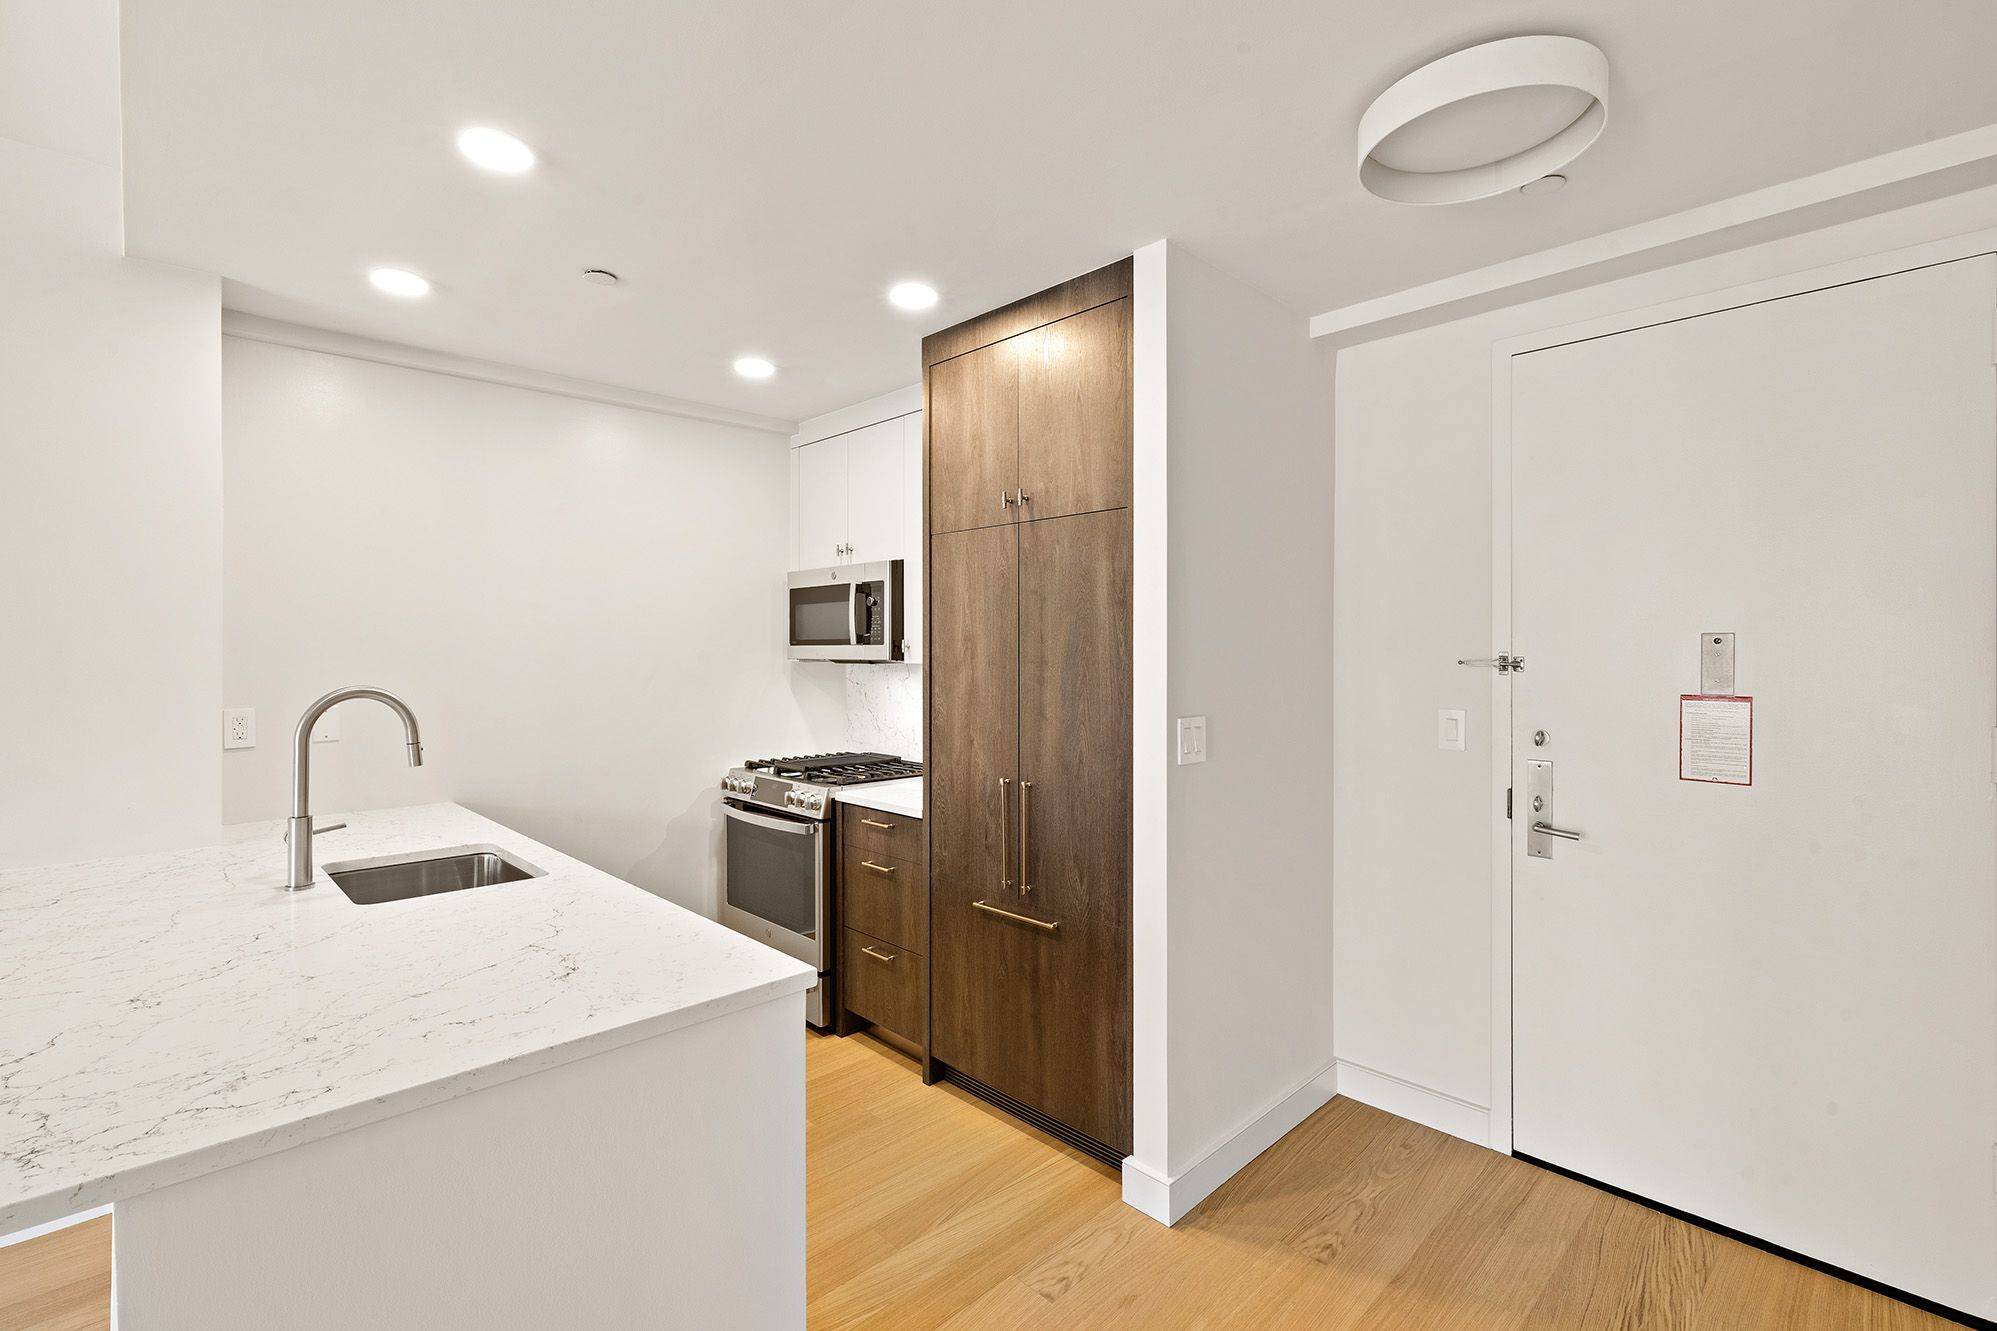 .... Introducing newly renovated apartment homes featuring top of the line appliances, countertops and hardwood flooring.